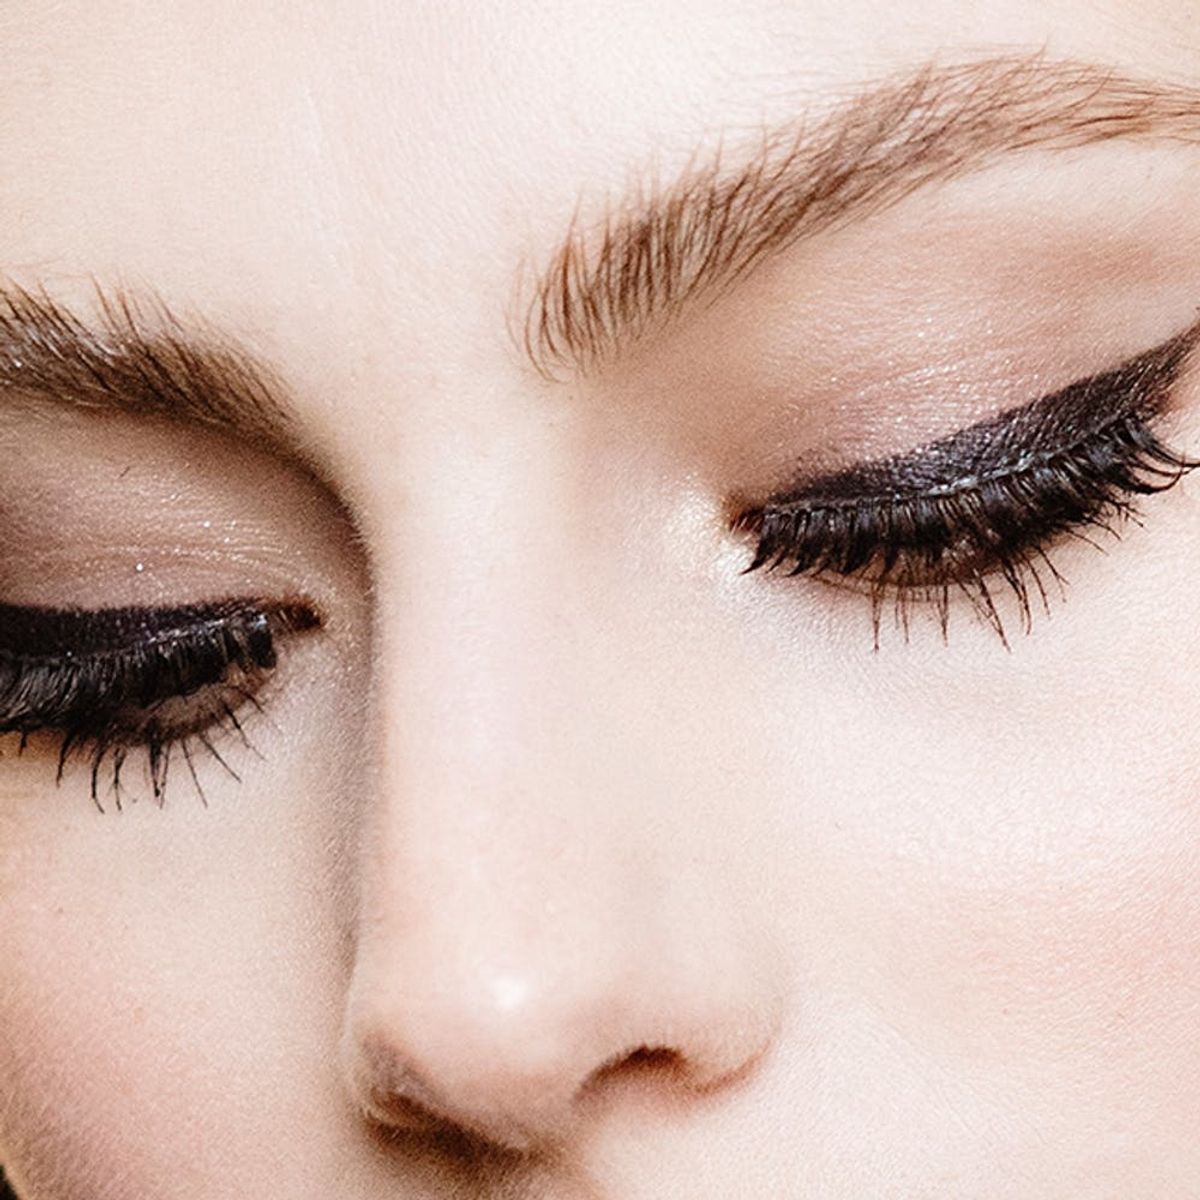 8 Things Eye Doctors Want You to Know About Eyelash Extensions